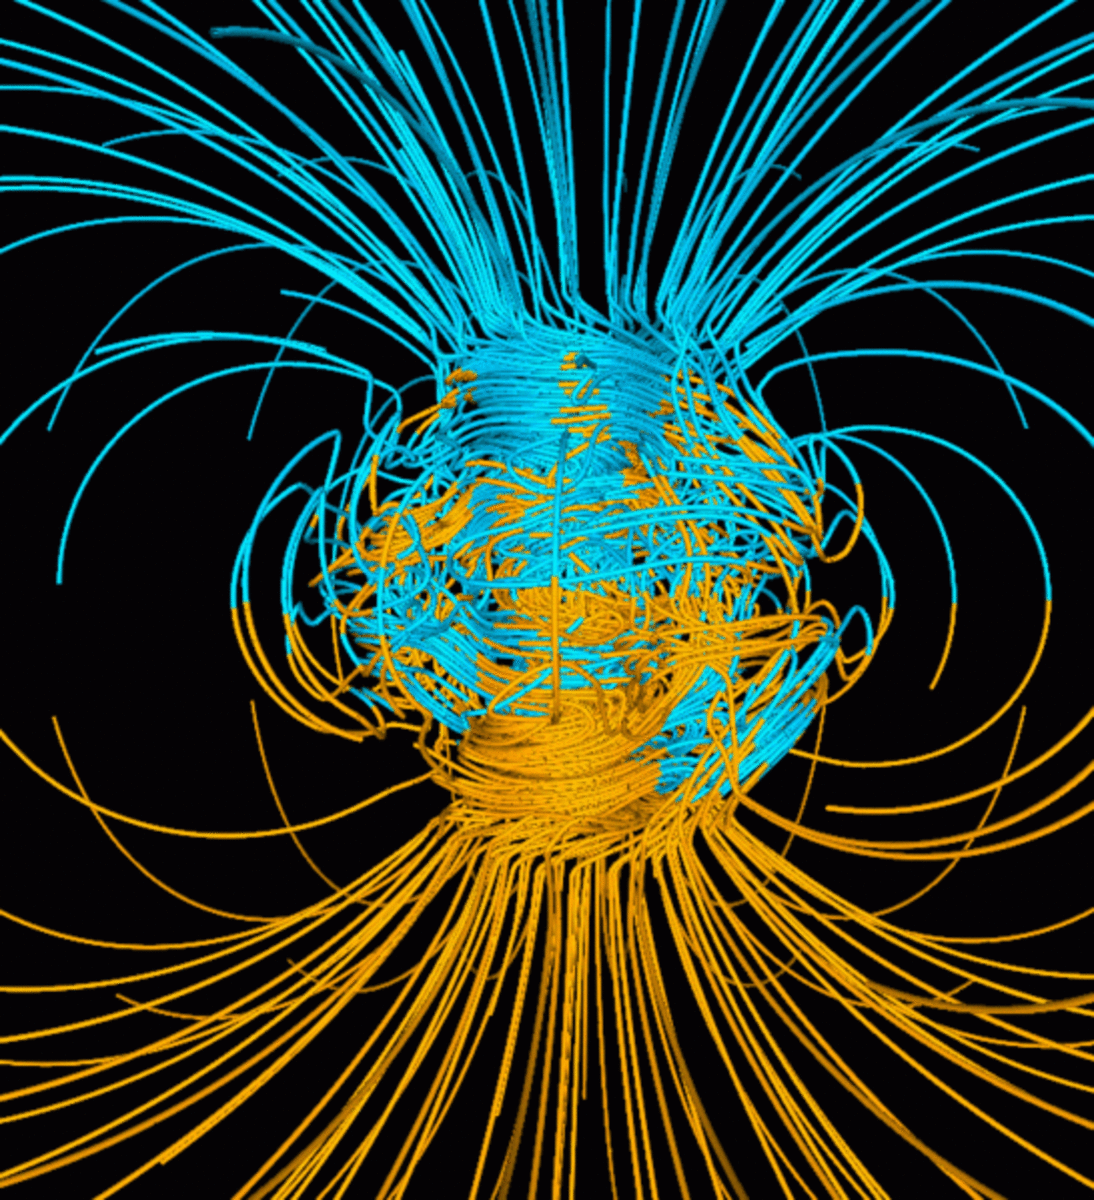 This computer model shows how the Earth's Magnetic Field normally looks.